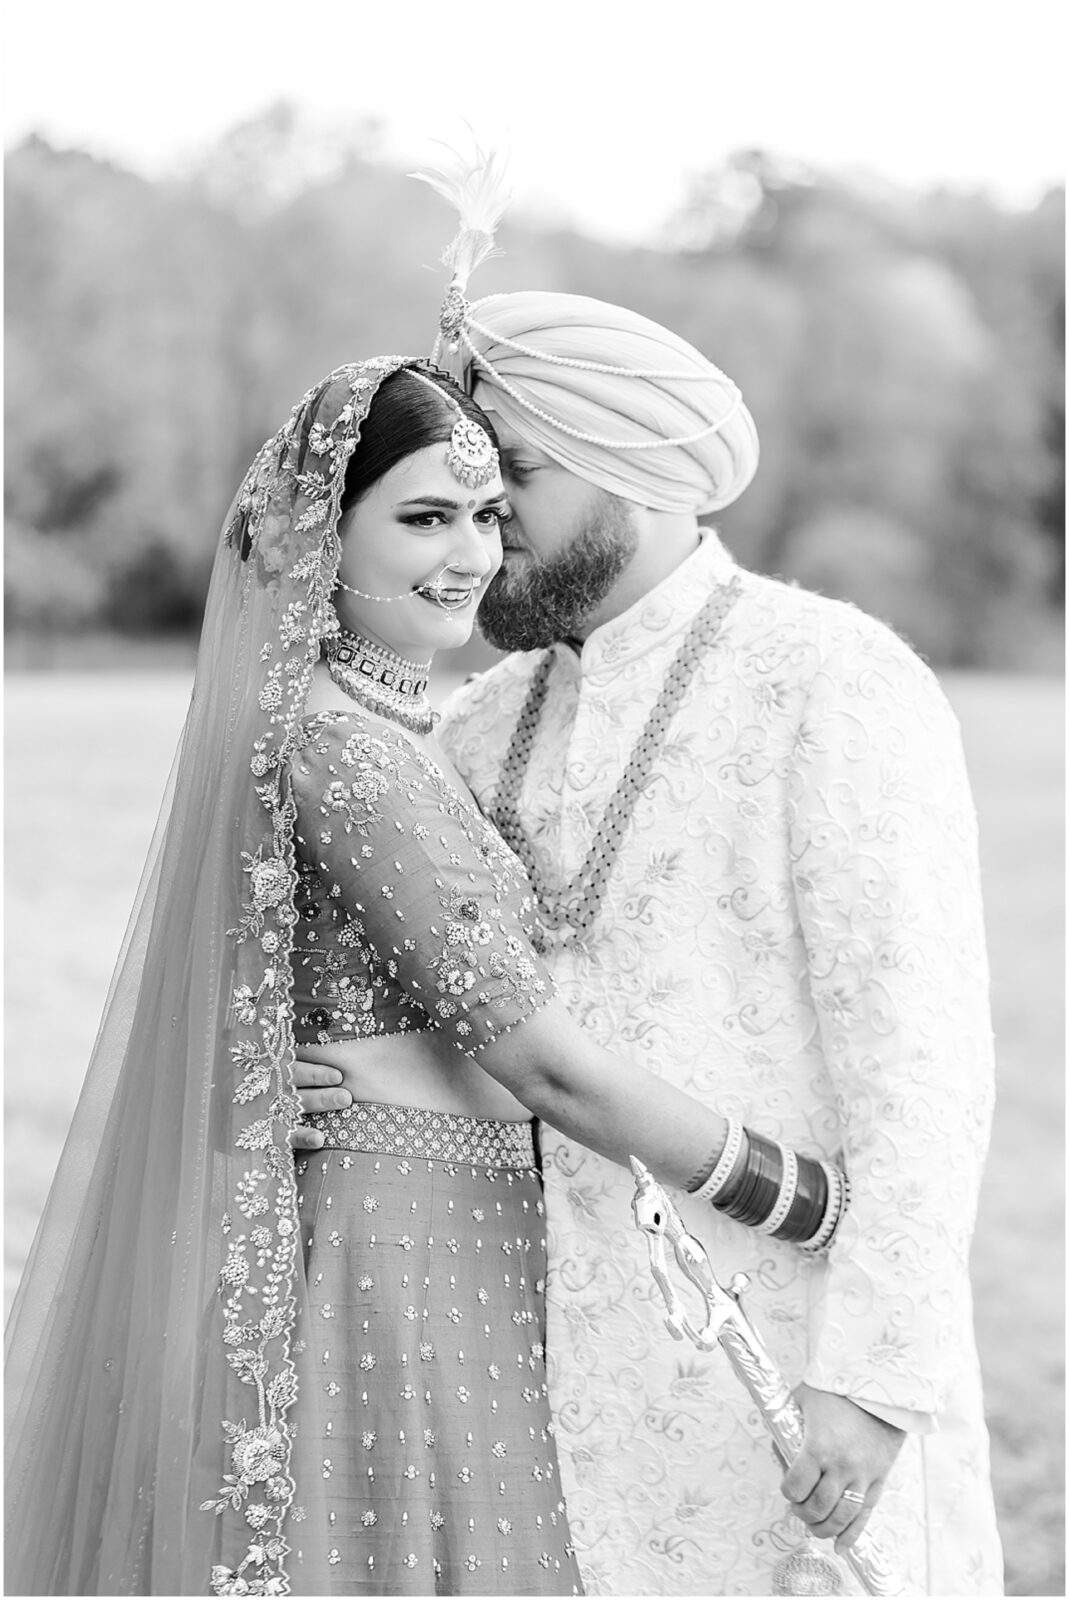 South Asian Bridal Portraits of Elegance - A Glimpse into an Indian Fusion Sikh Wedding at Kansas Mildale Farms, featuring Sangeet, henna, baraat, dholi, by Mariam Saifan Photography - Your Kansas City Wedding Photographer